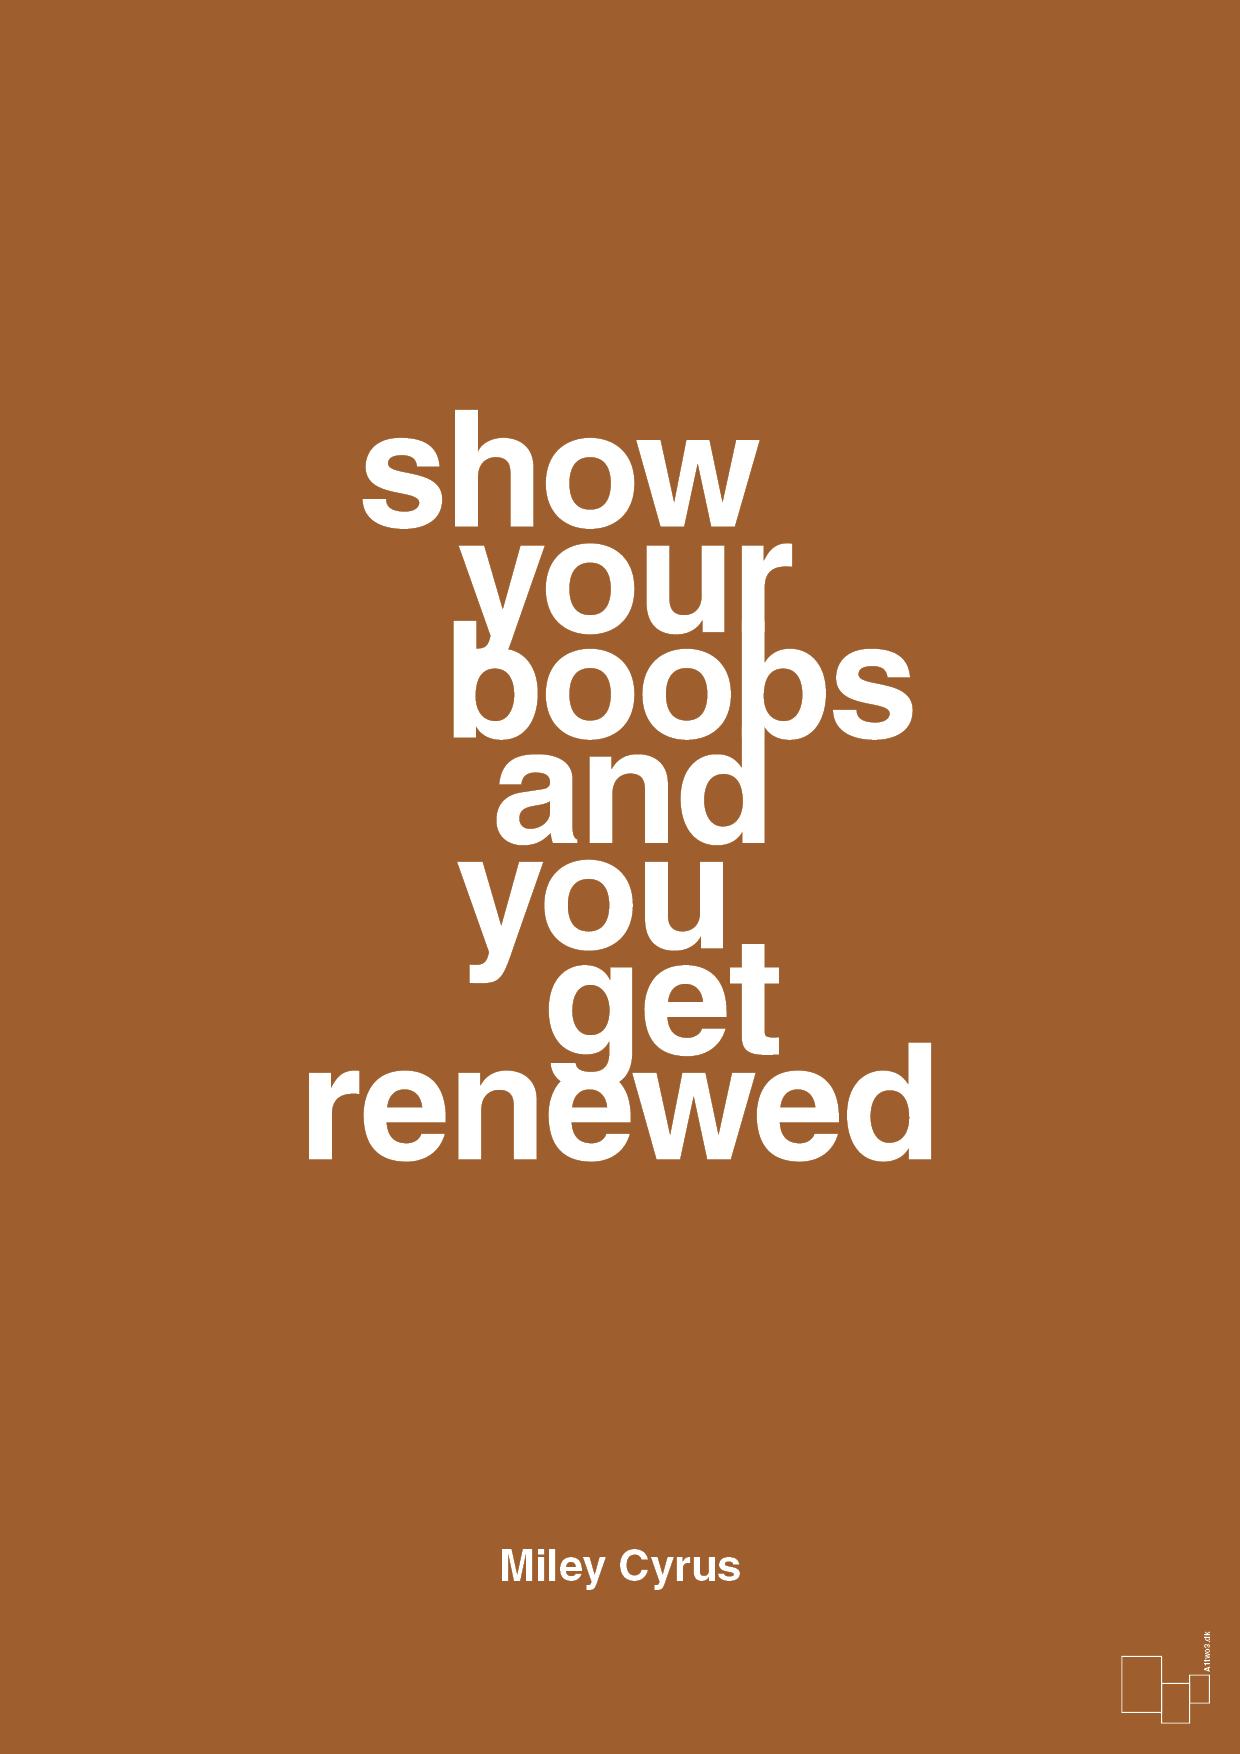 show your boobs and you get renewed - Plakat med Citater i Cognac